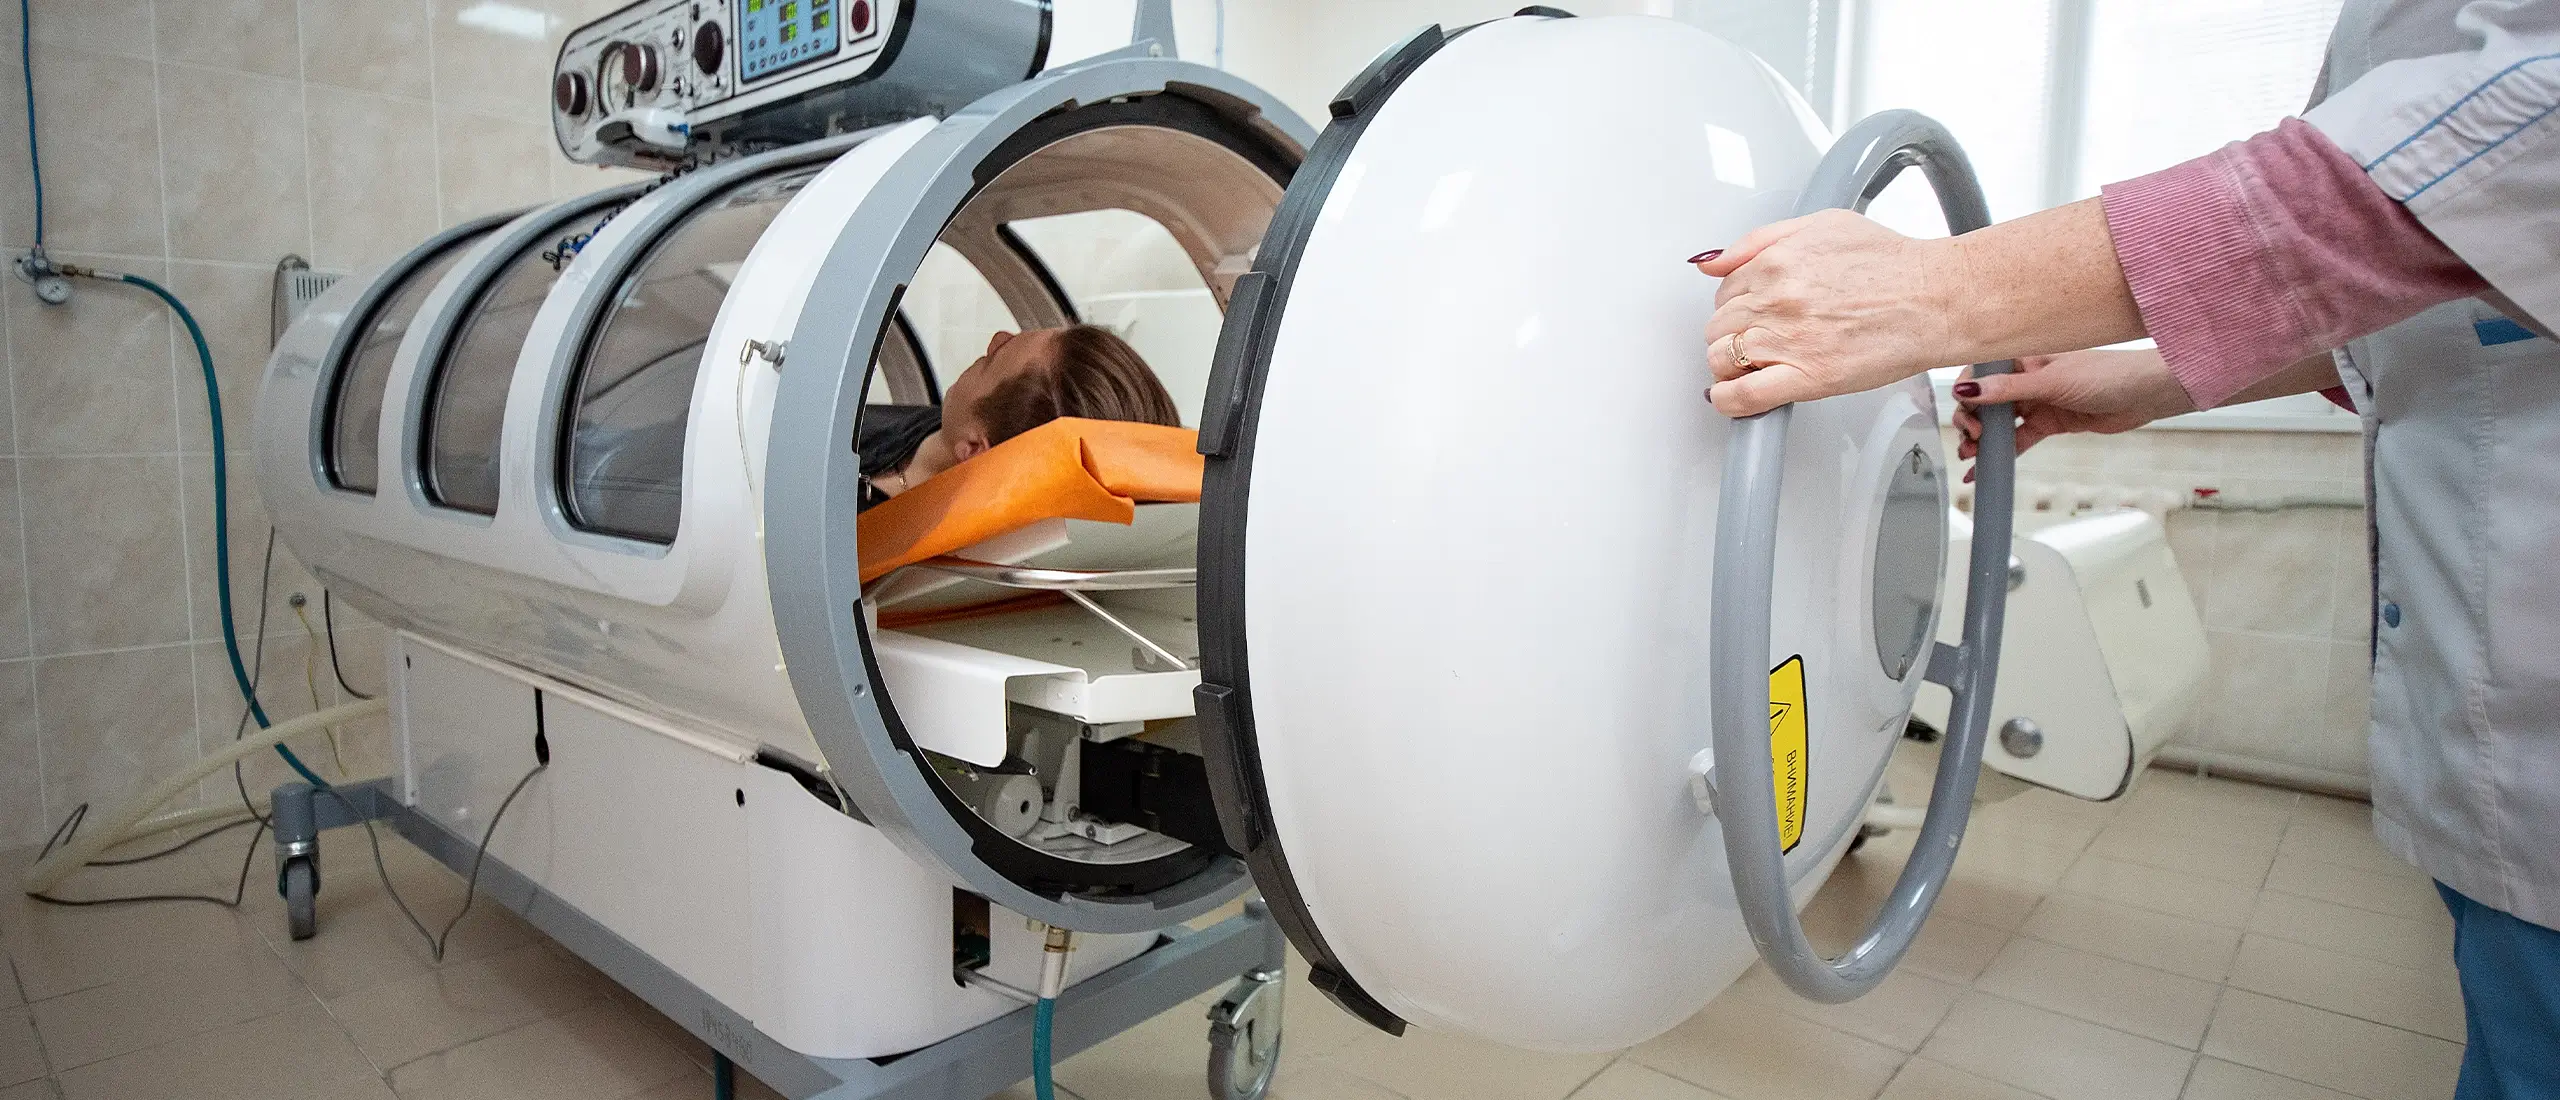 someone being put into a hyperbaric chamber